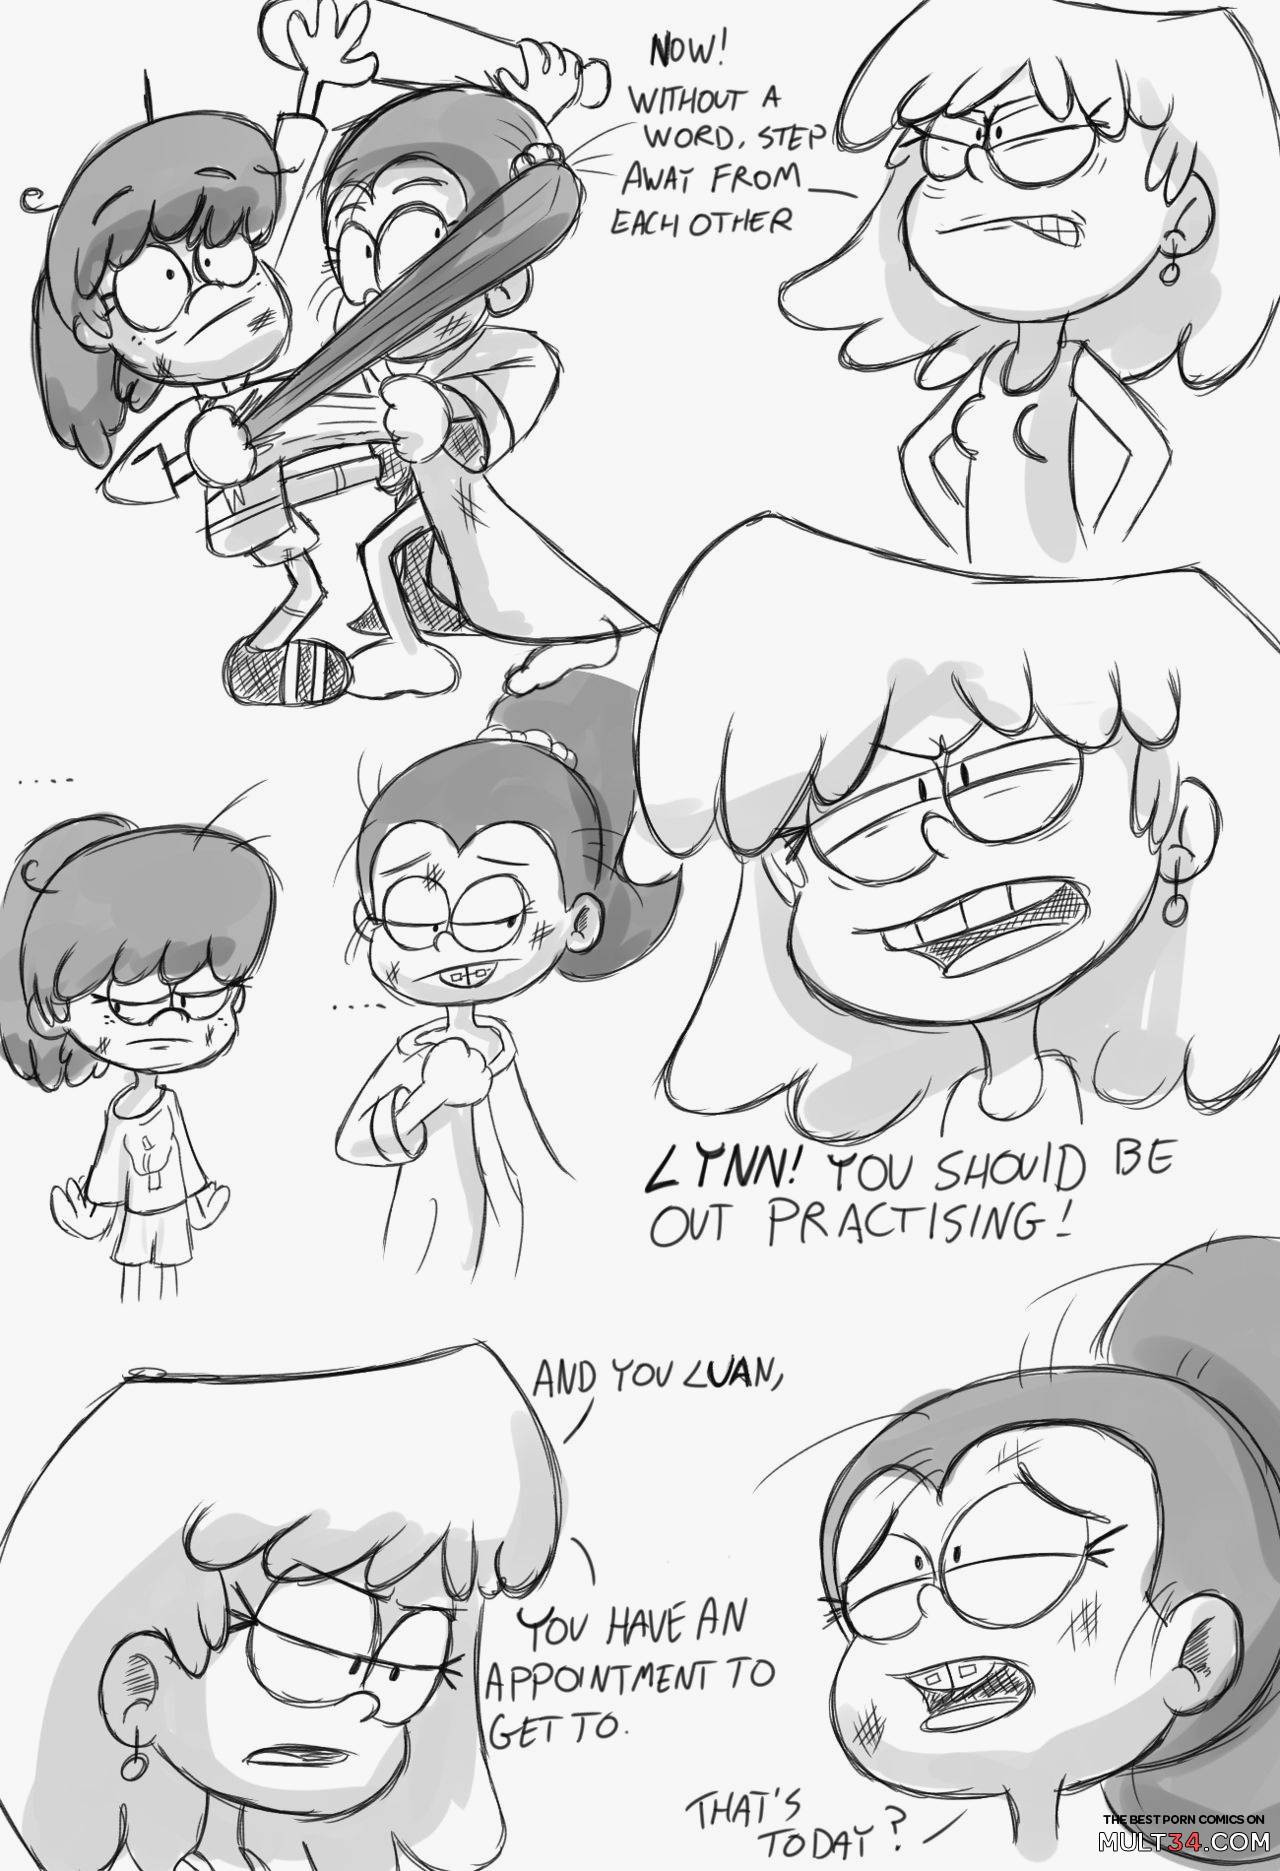 The loud house comic, chapter 2 page 3